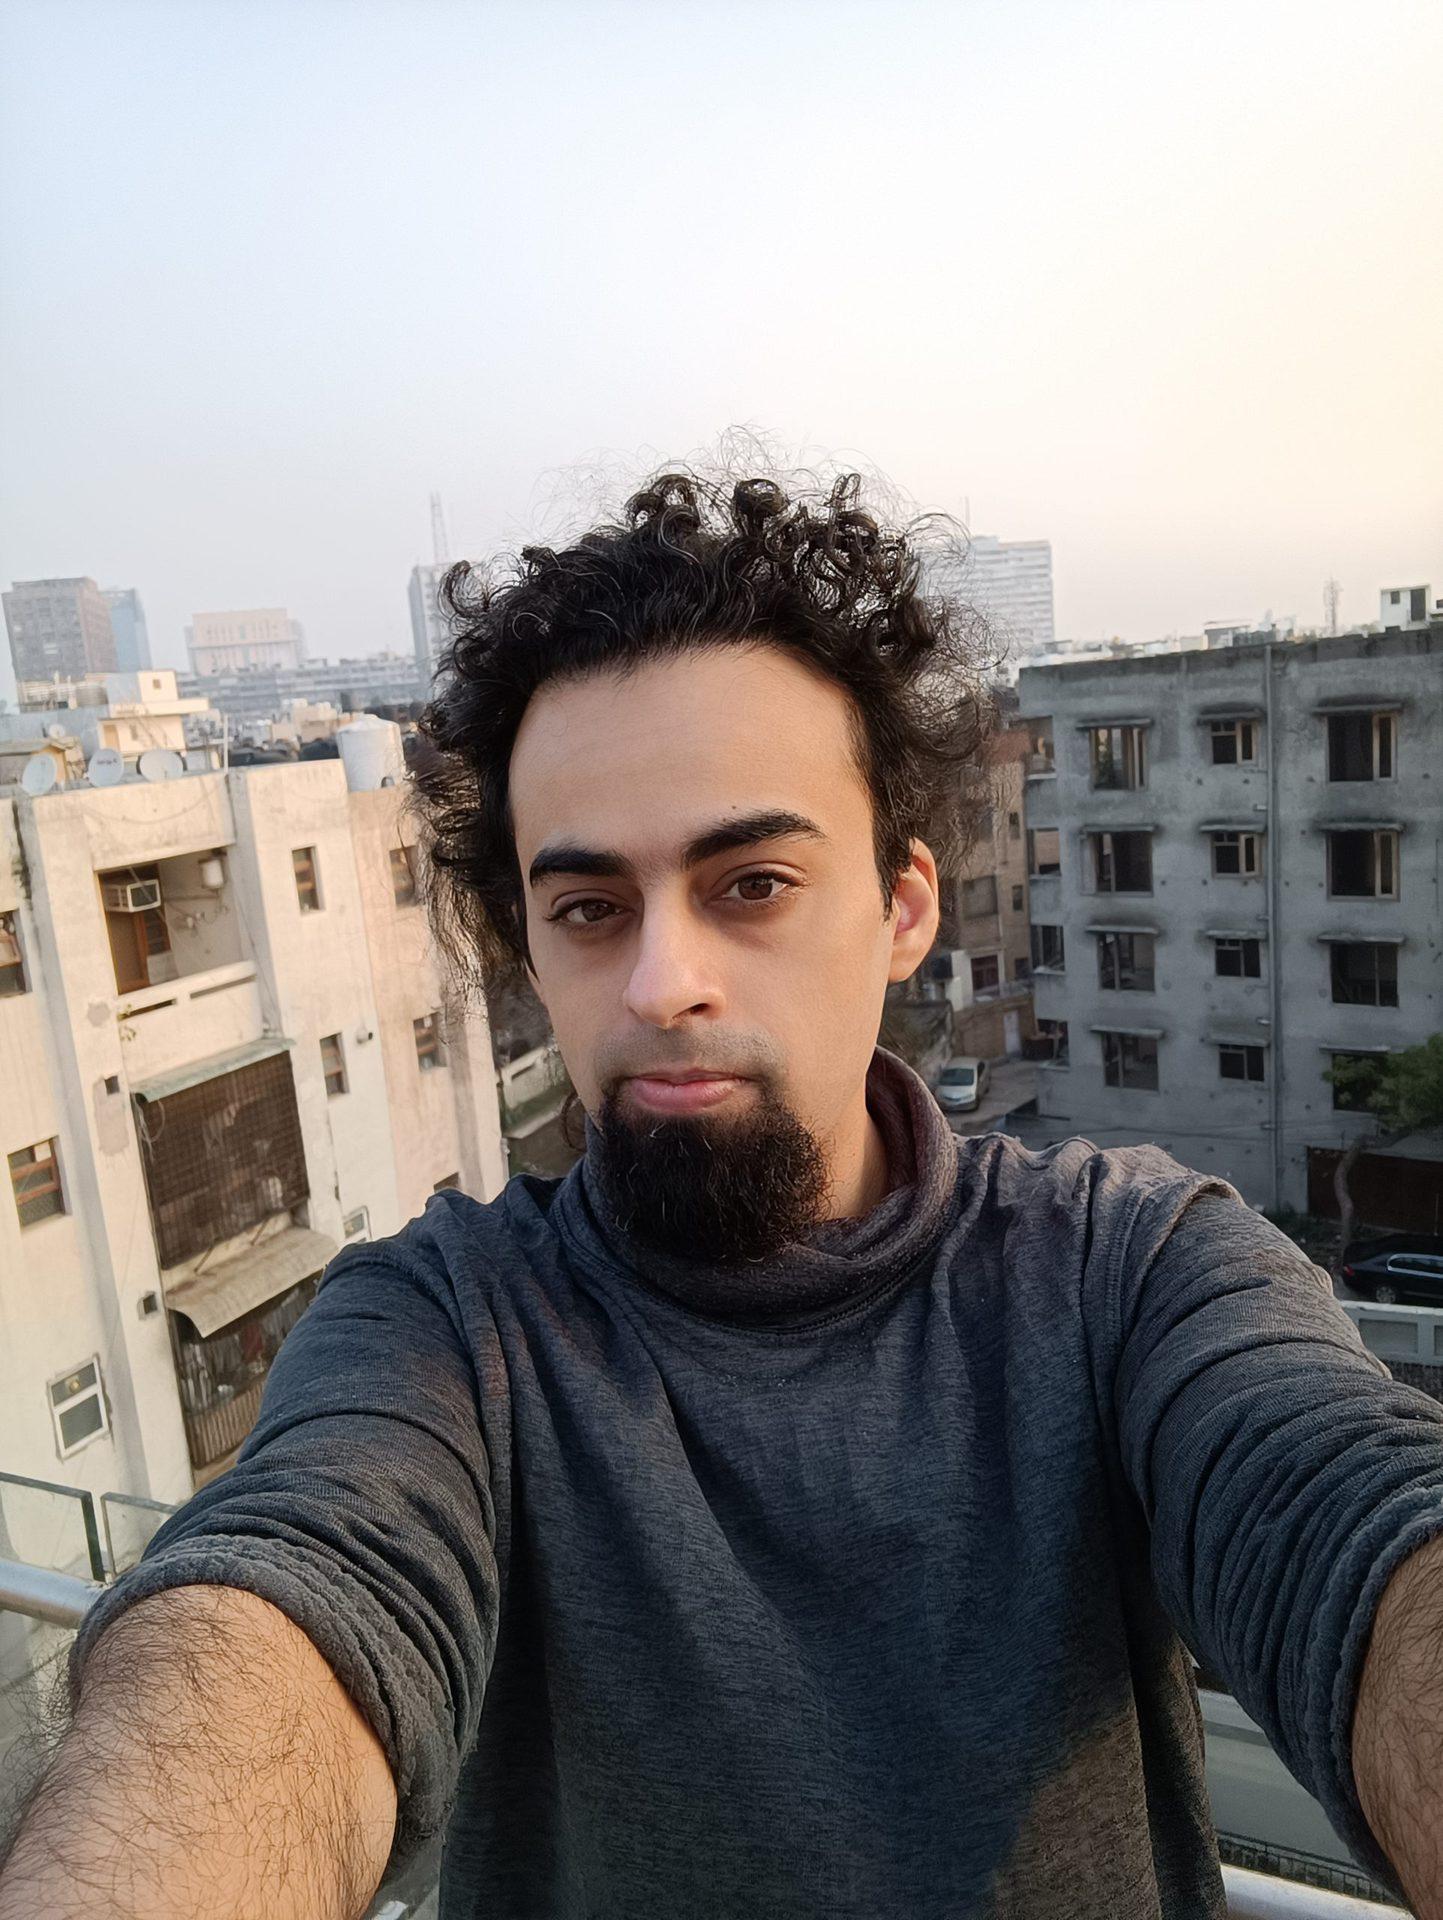 Mi 11i front camera selfie of a man with dark curly hair and a beard, with buildings visible behind him